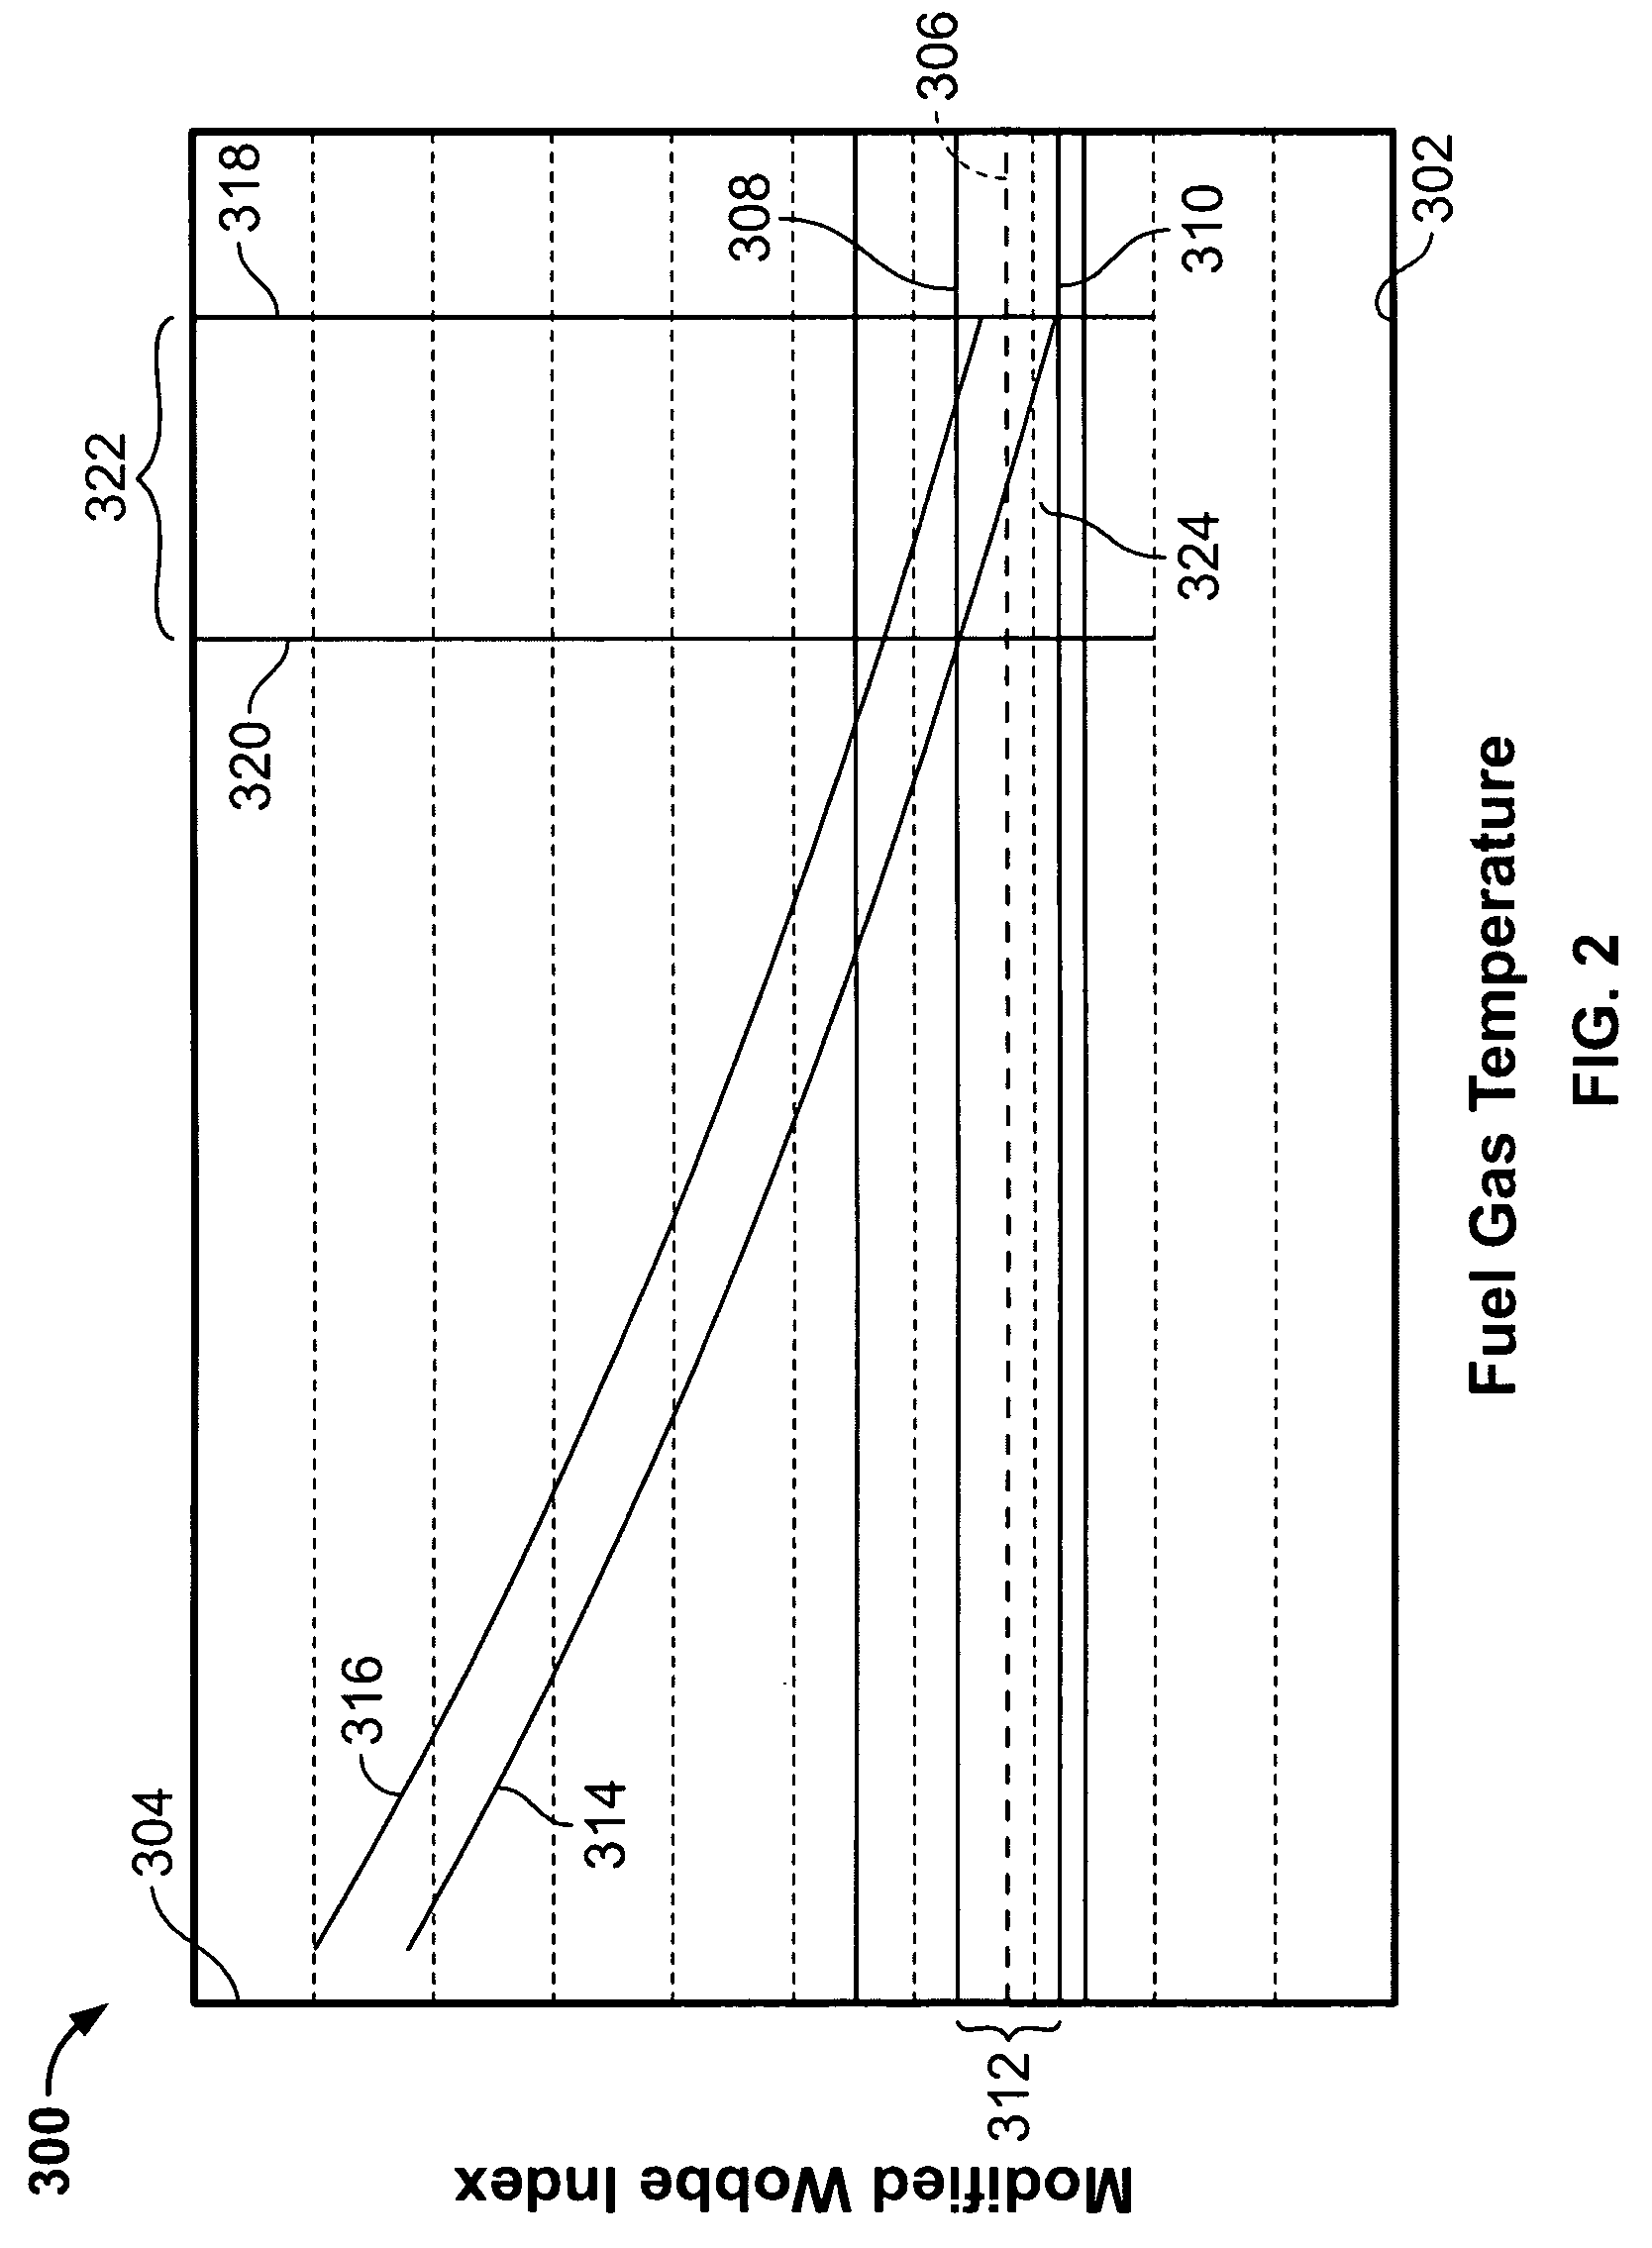 Method for operating gas turbine engine systems